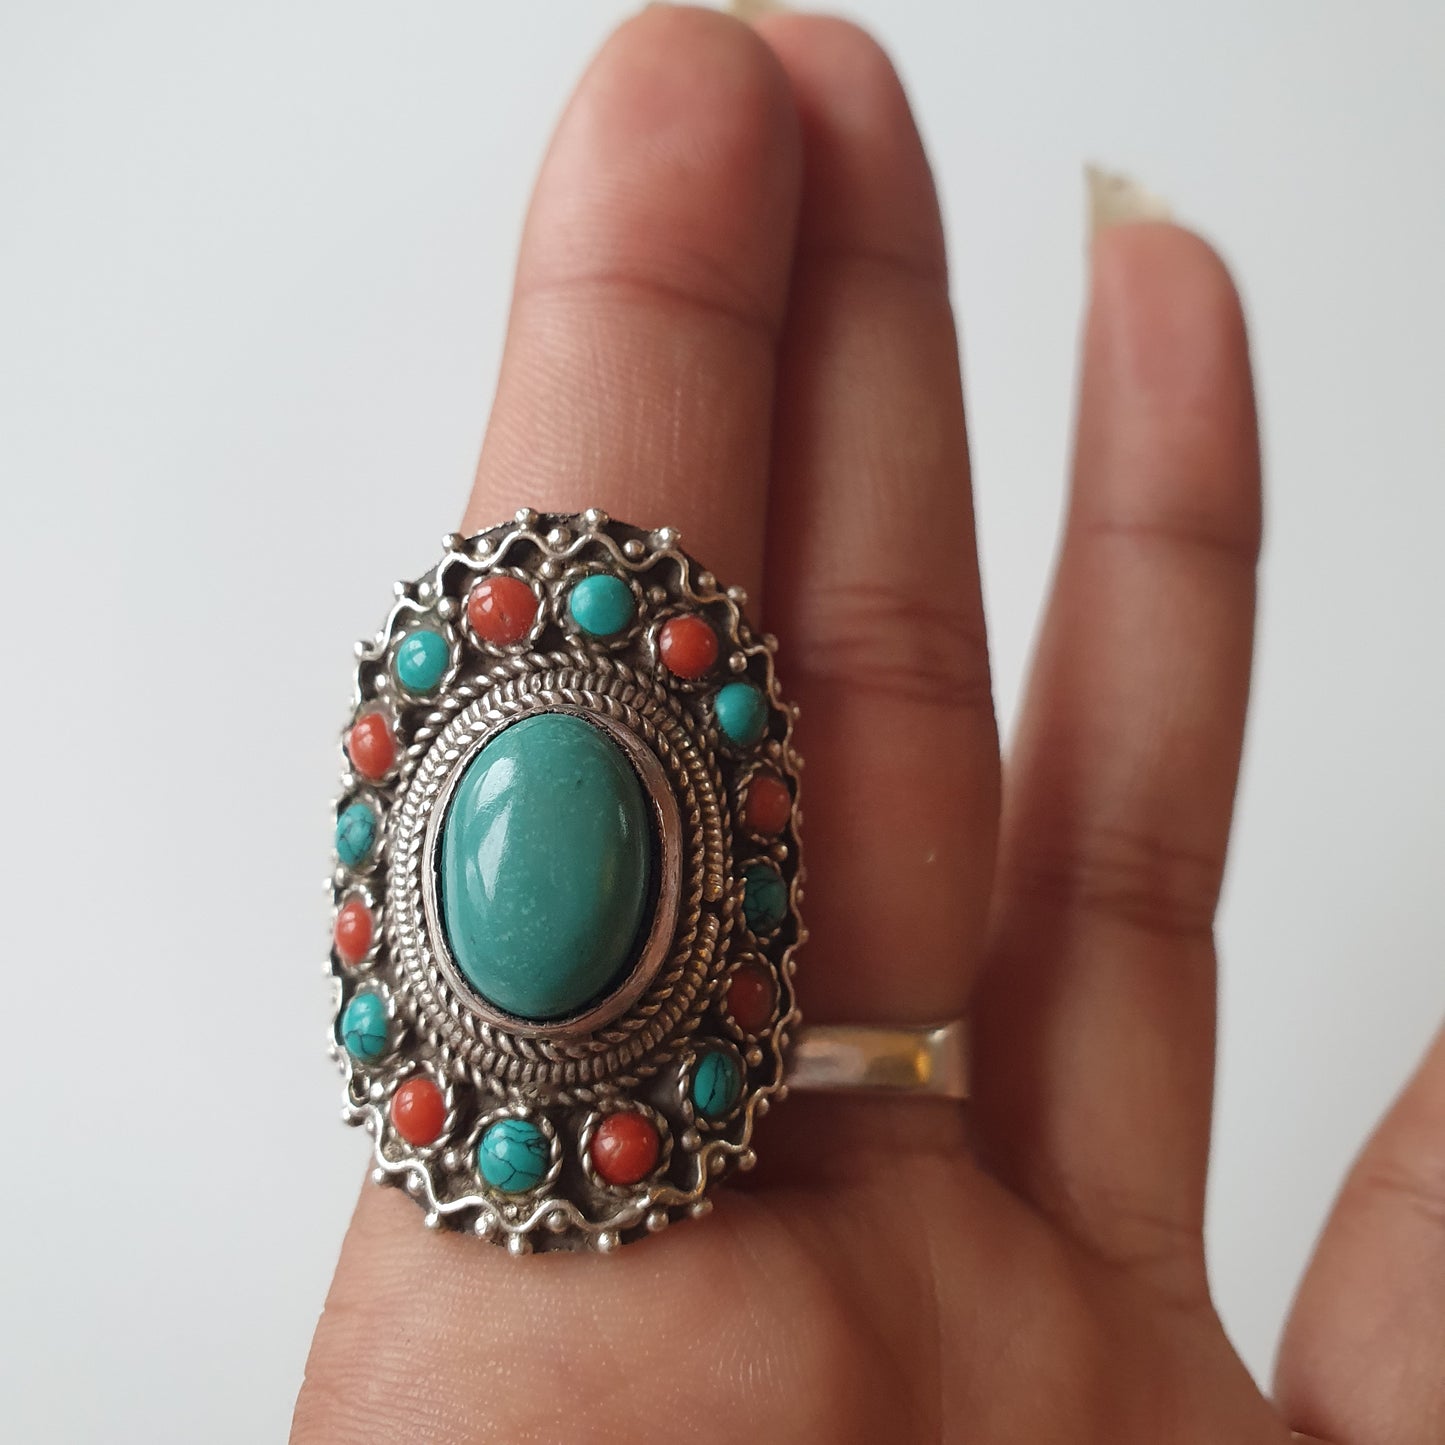 Bohemian ring sterling silver with turquoise and coral gemstone